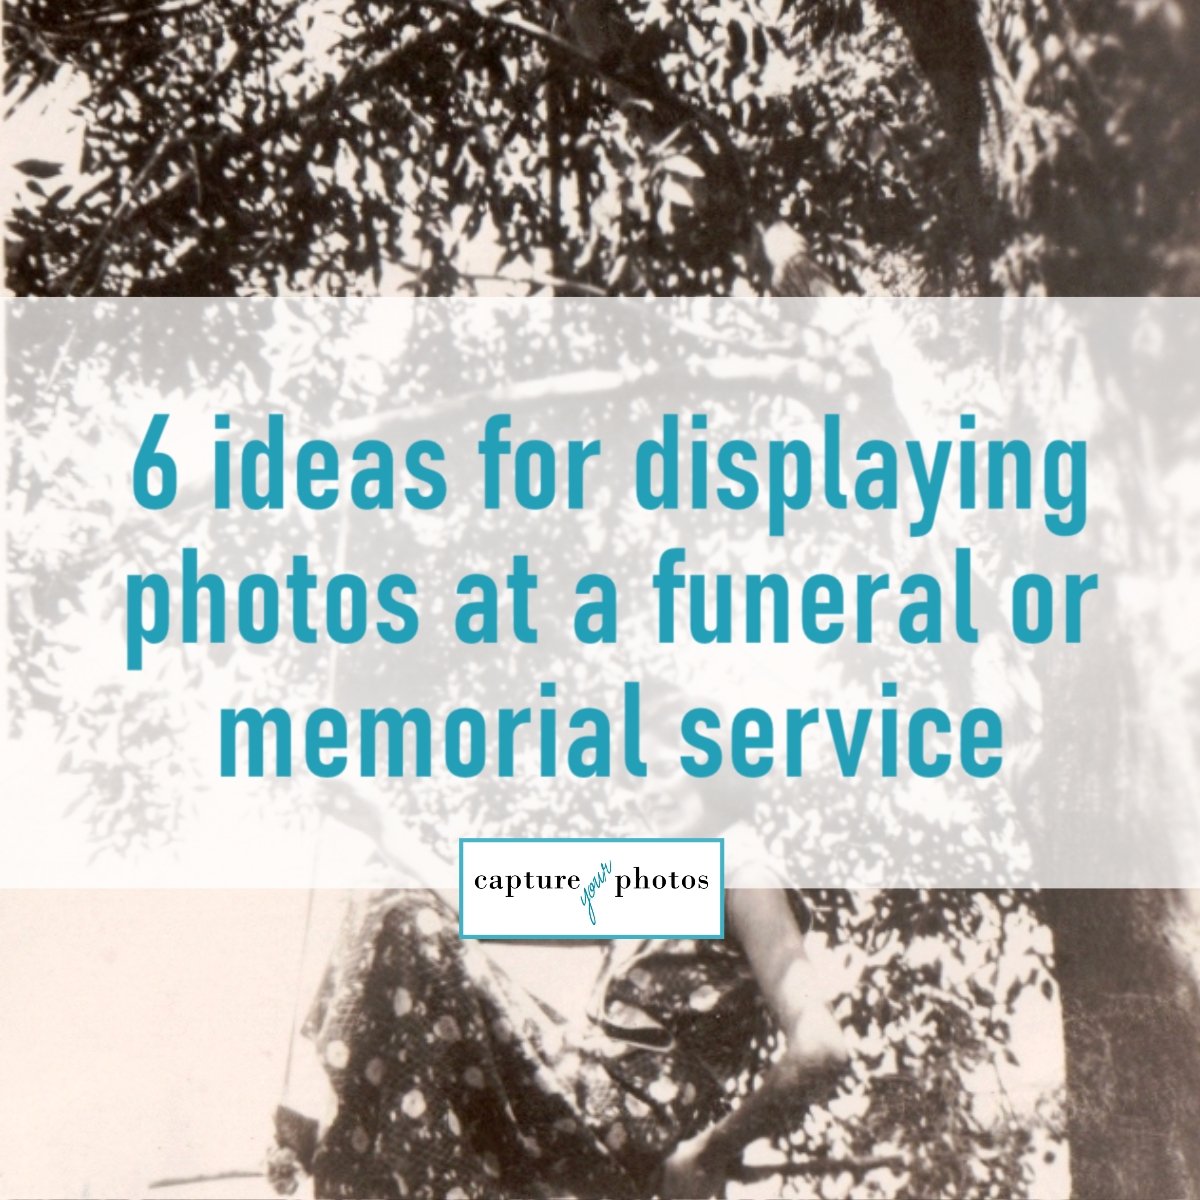 Capture Your Photos - 6 ideas for displaying photos at a funeral or  memorial service - Minnesota Photo Organizing Service